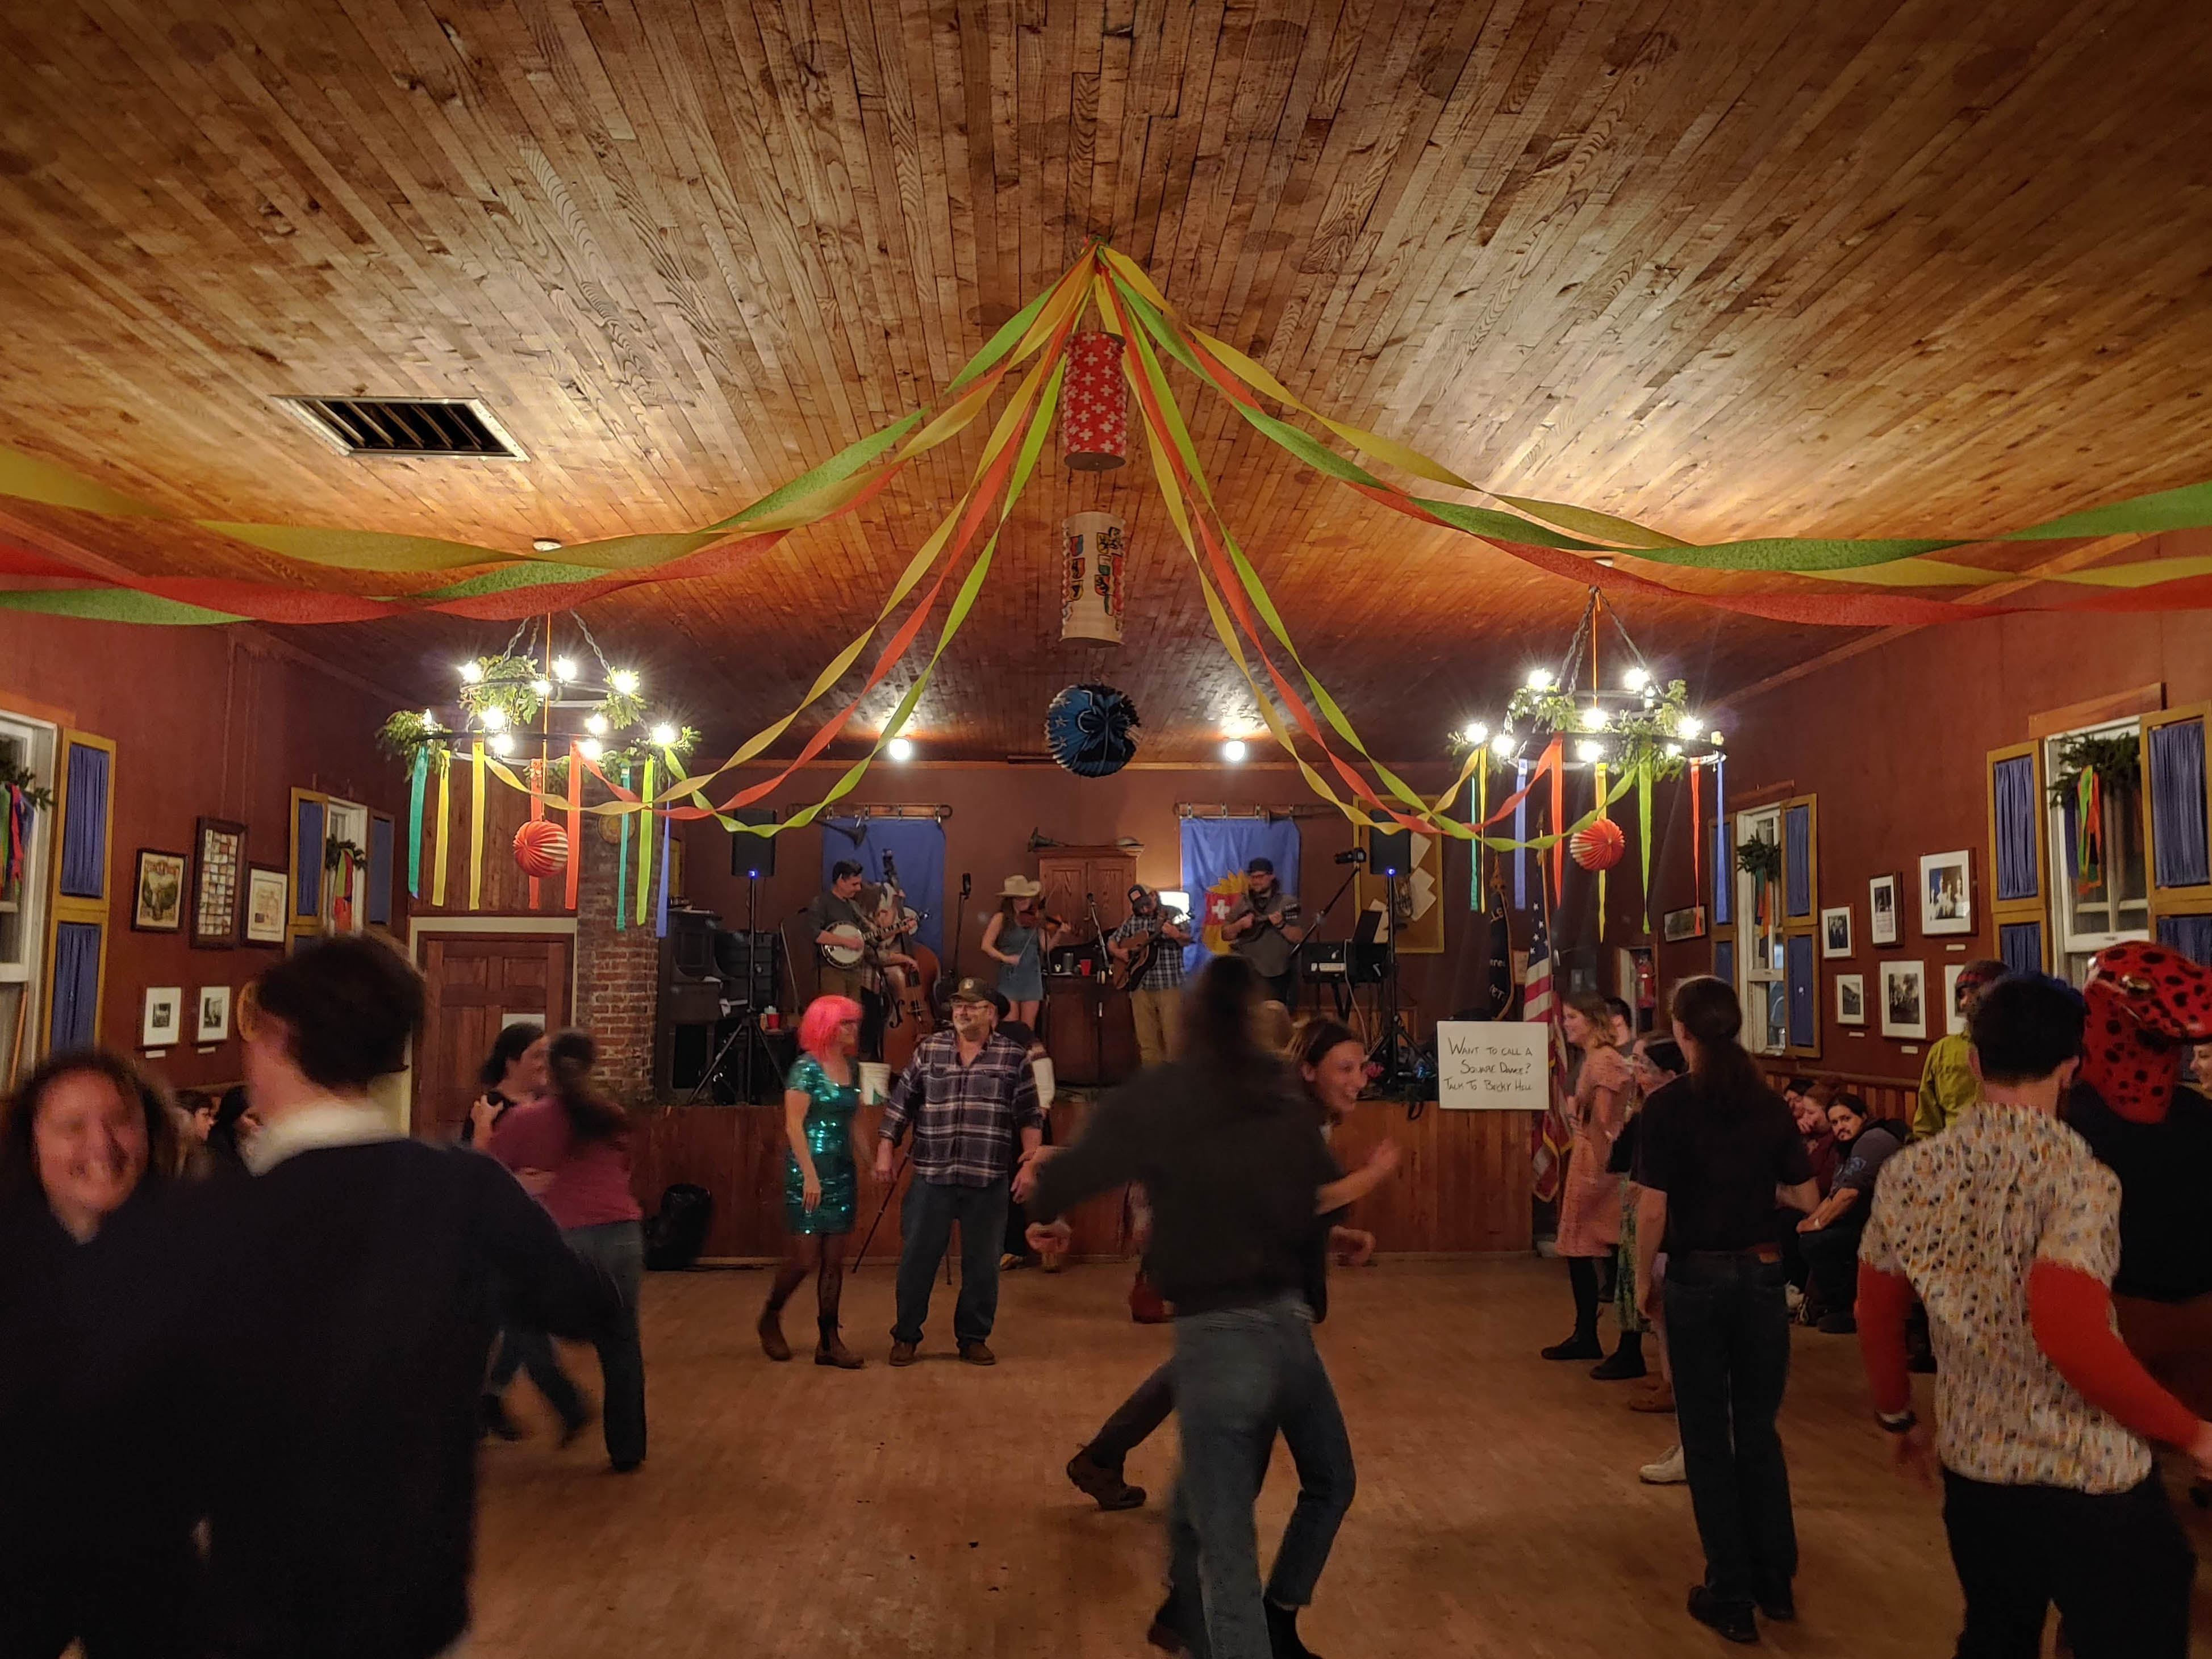 Inside a dance hall, colorful streamers overhead. A string band plays in the background on a stage for dancers in the foreground.